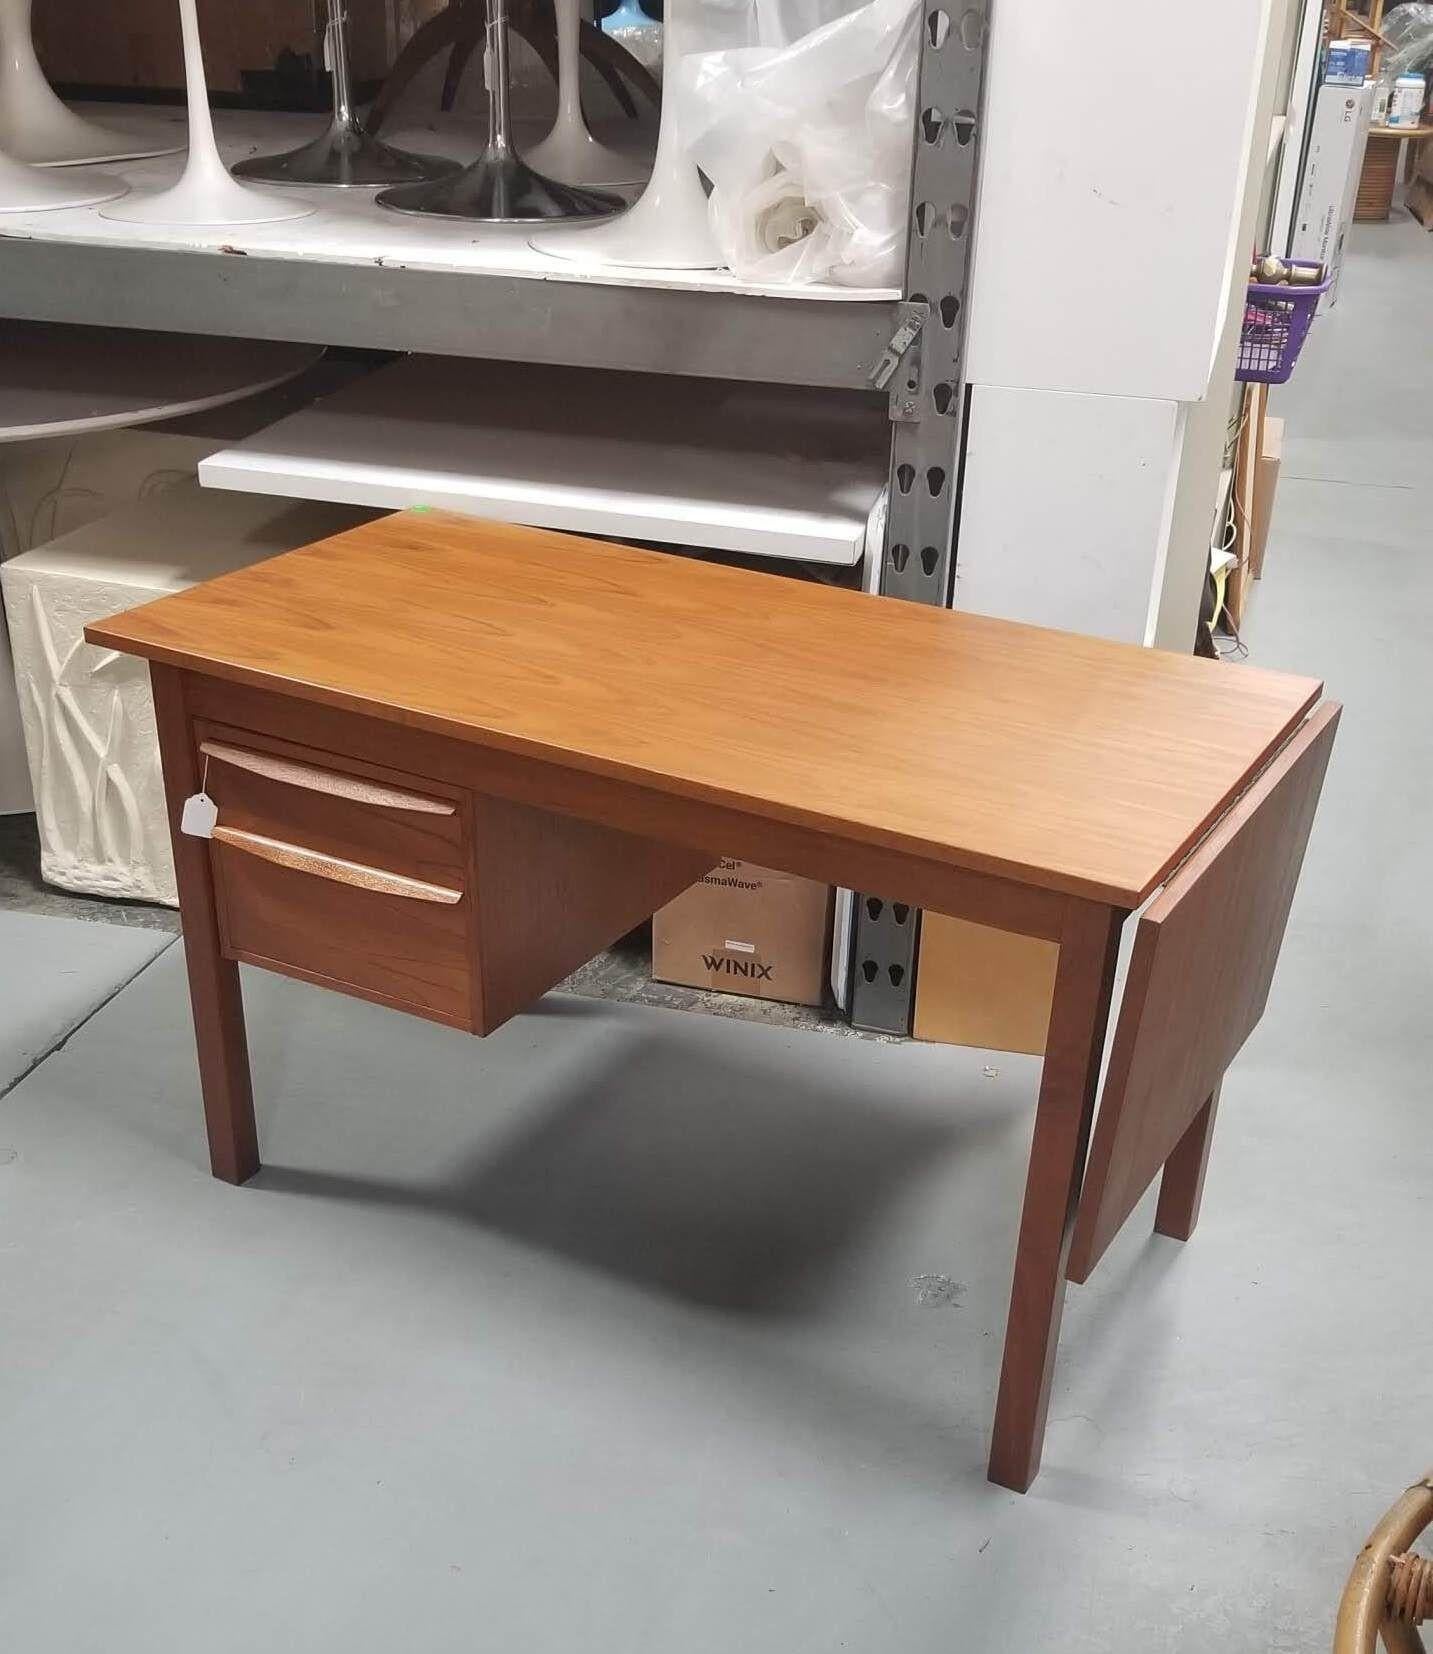 Restored Mid Century Modern Teak Wood Desk with Adjustable Base and Drop Leaf In Excellent Condition For Sale In Van Nuys, CA